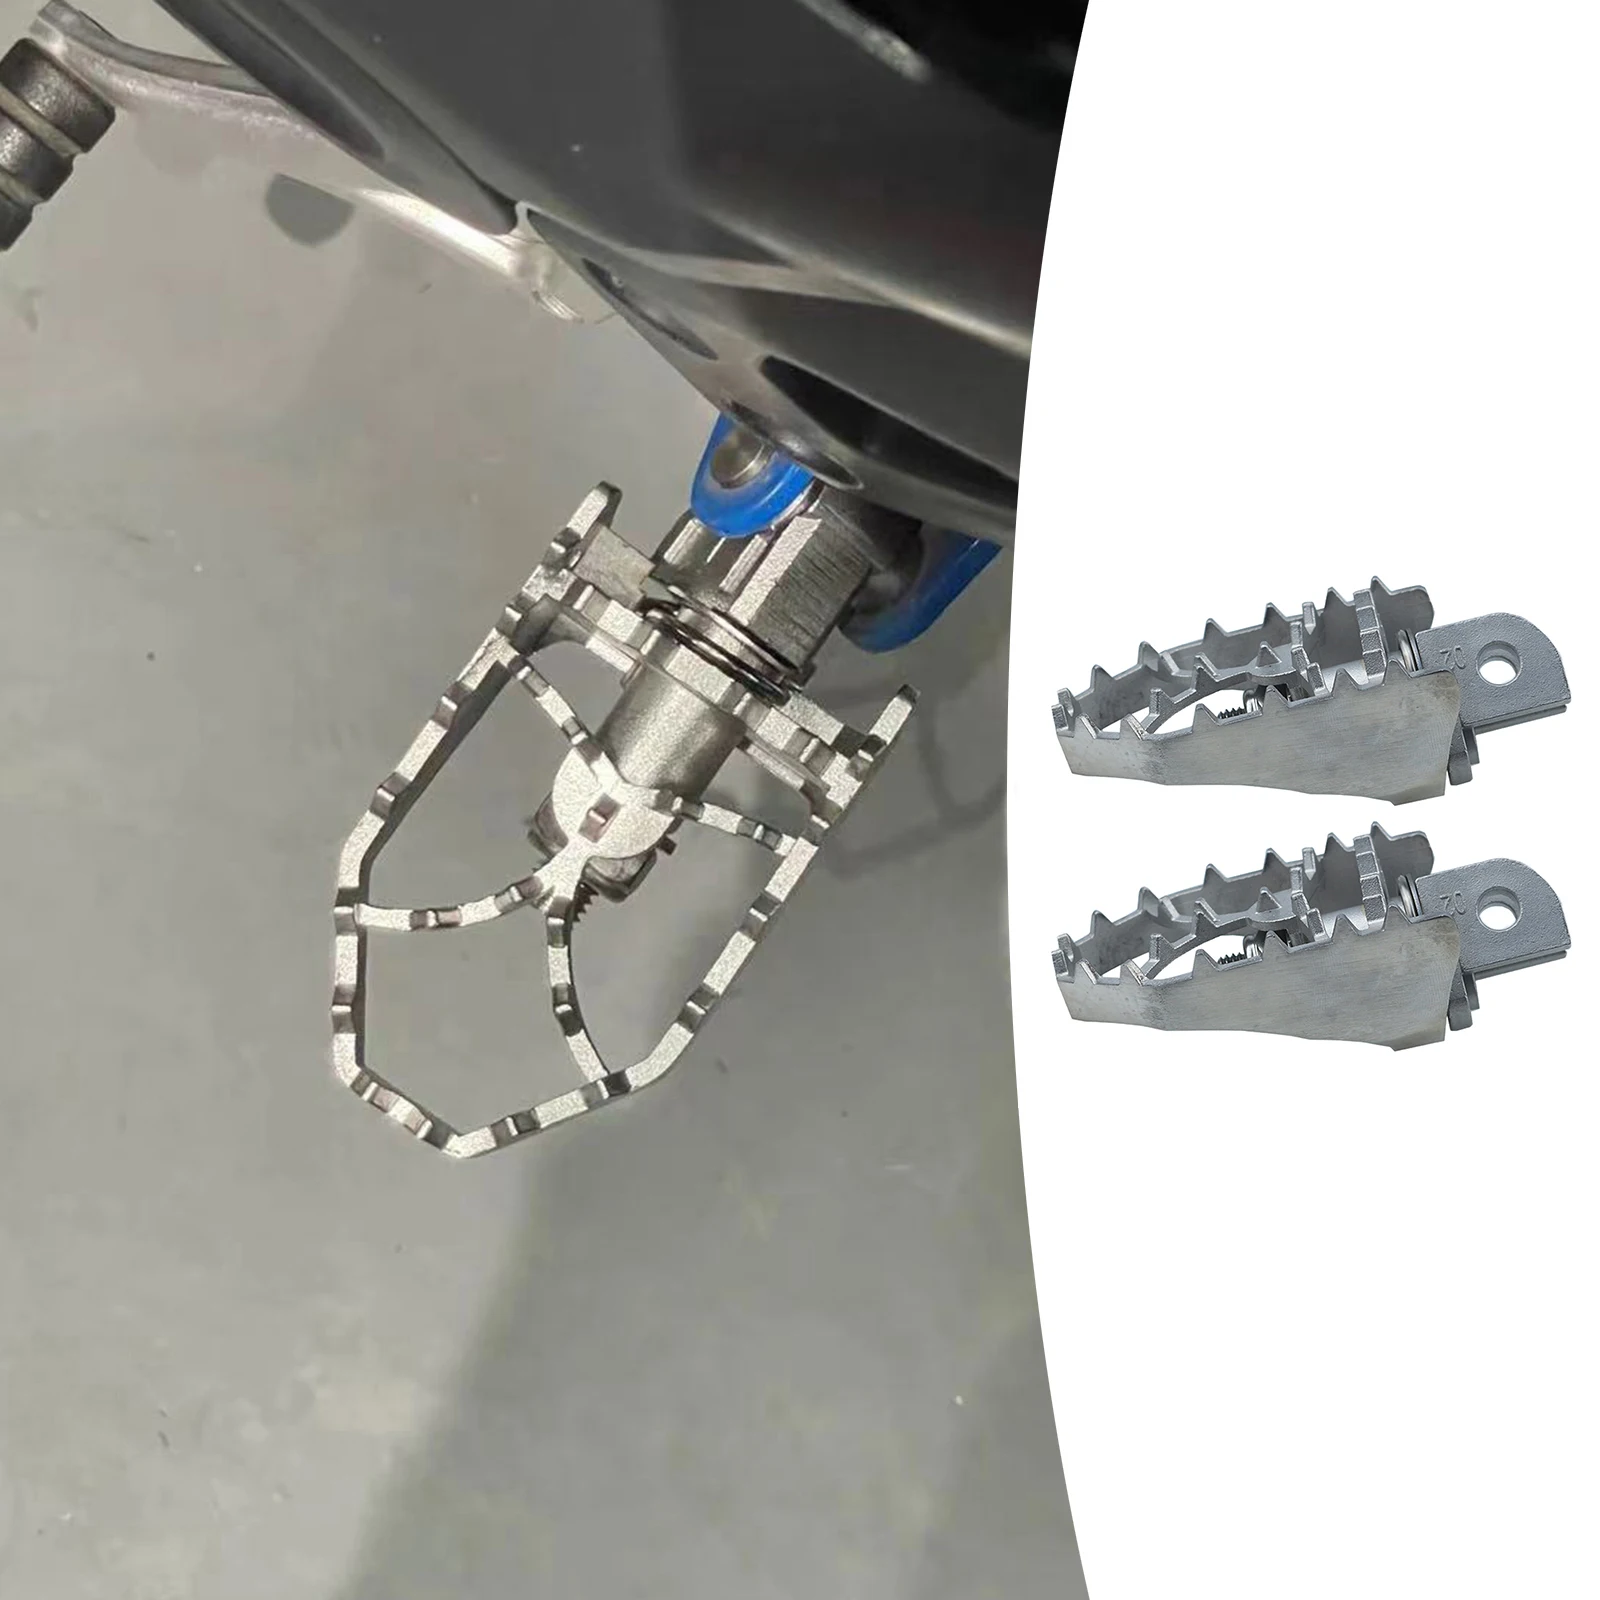 

Stainless Steel Dirt Bike Wide Foot Pegs Pedal Foot Rest for YAMAHA TRACER 900/GT 15-20 FJ-09 15-20 Motorbike Replace Parts